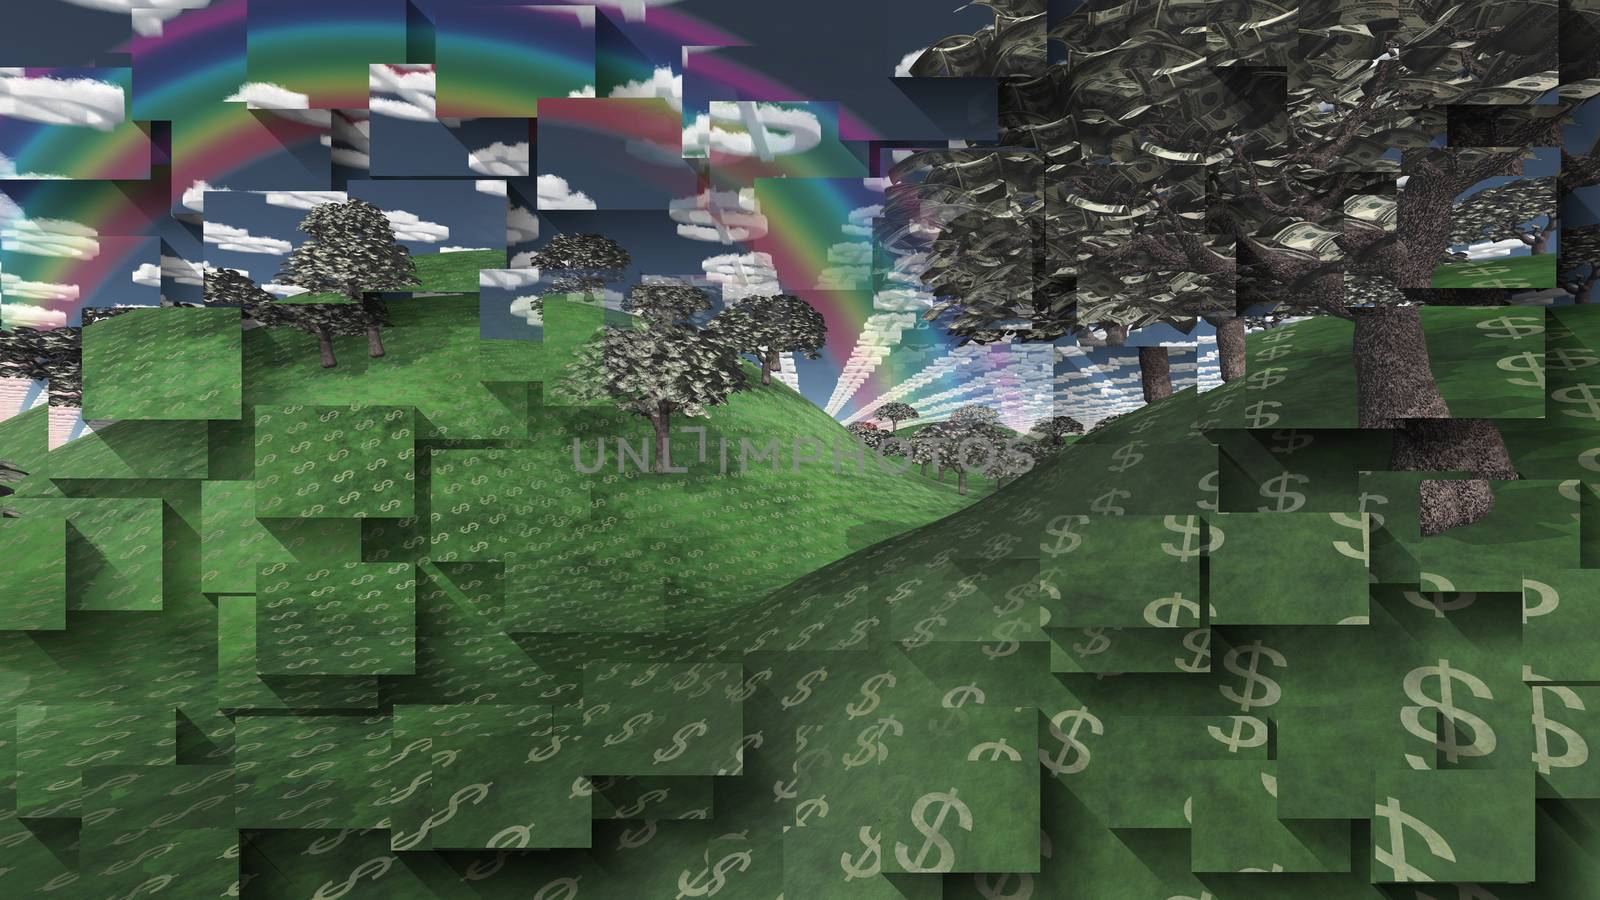 Surreal digital art. Landscape with currency elements. Trees with dollars banknotes instead of leaves. Clouds in shape of dollars sign. Rainbow in the sky.